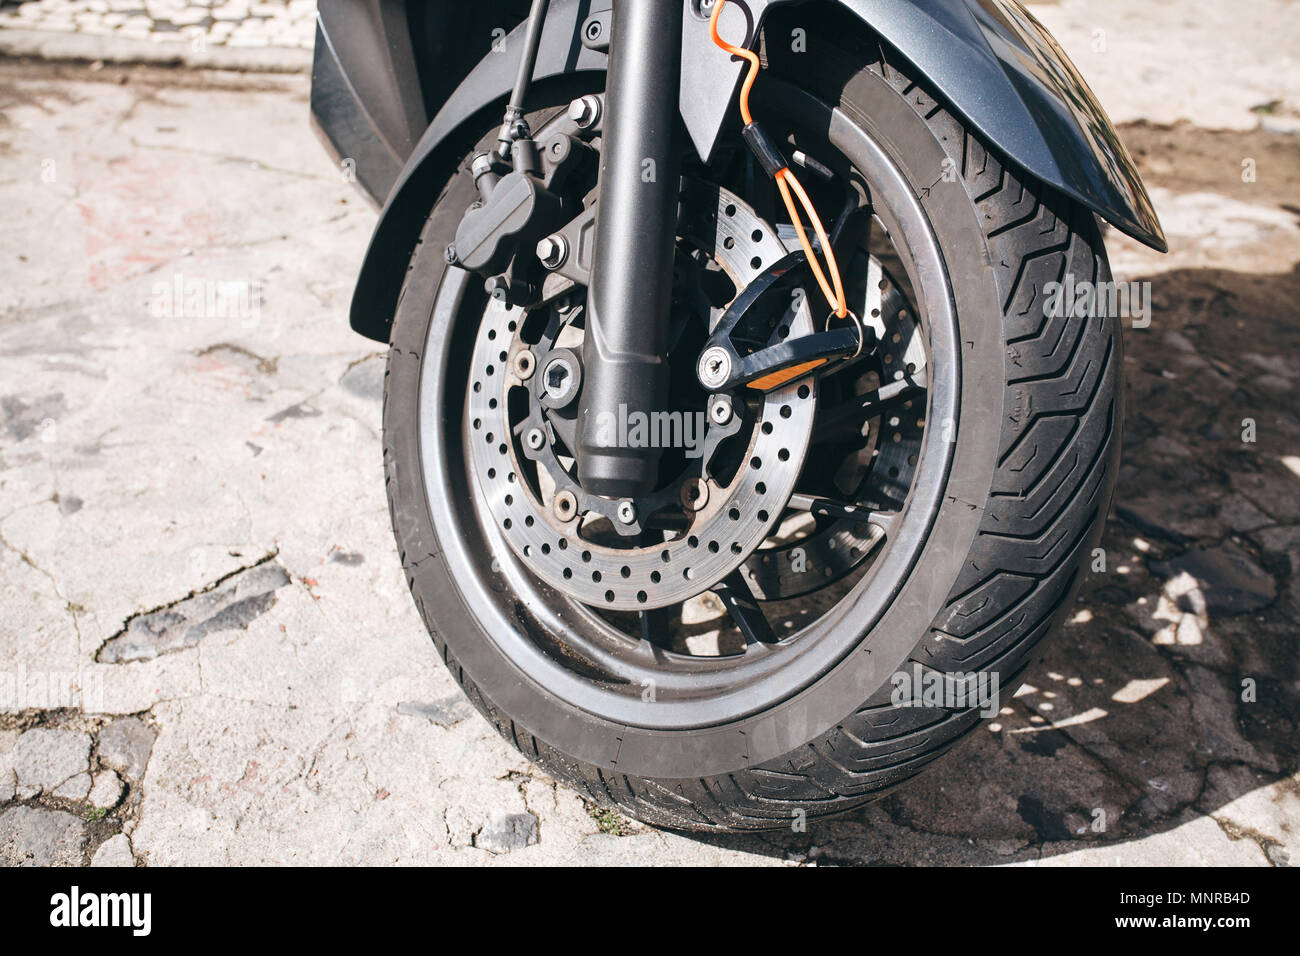 Wheel of motorcycle or scooter or moped. Autotire or tire and design of wheel of motorcycle. Brake system and spare parts for bike Stock Photo